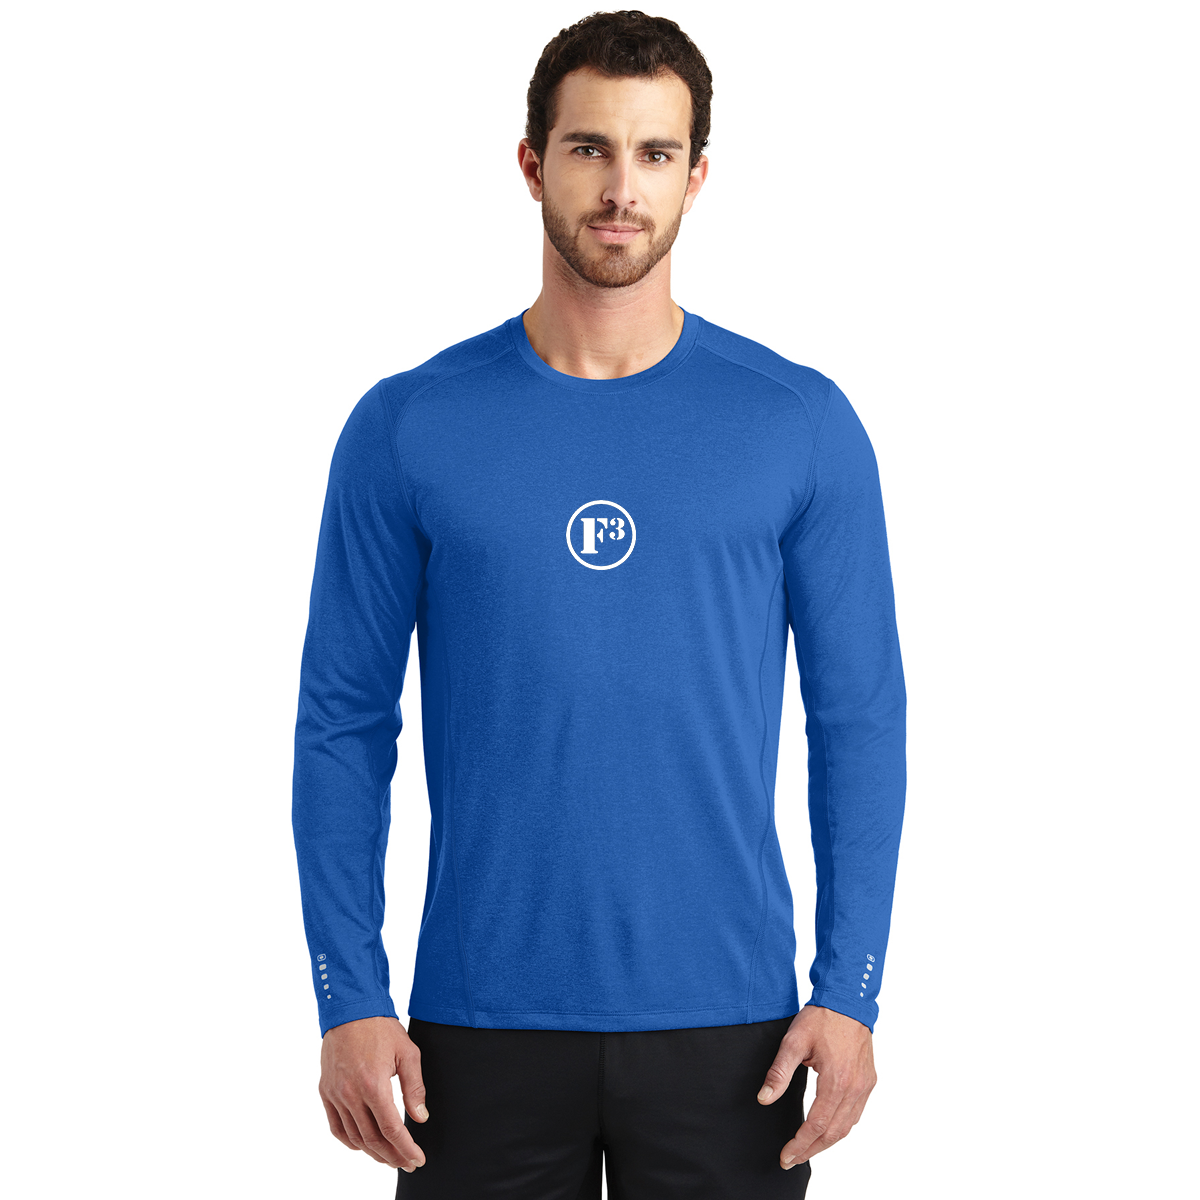 F3 OGIO ENDURANCE Long Sleeve Pulse Crew - Made to Order